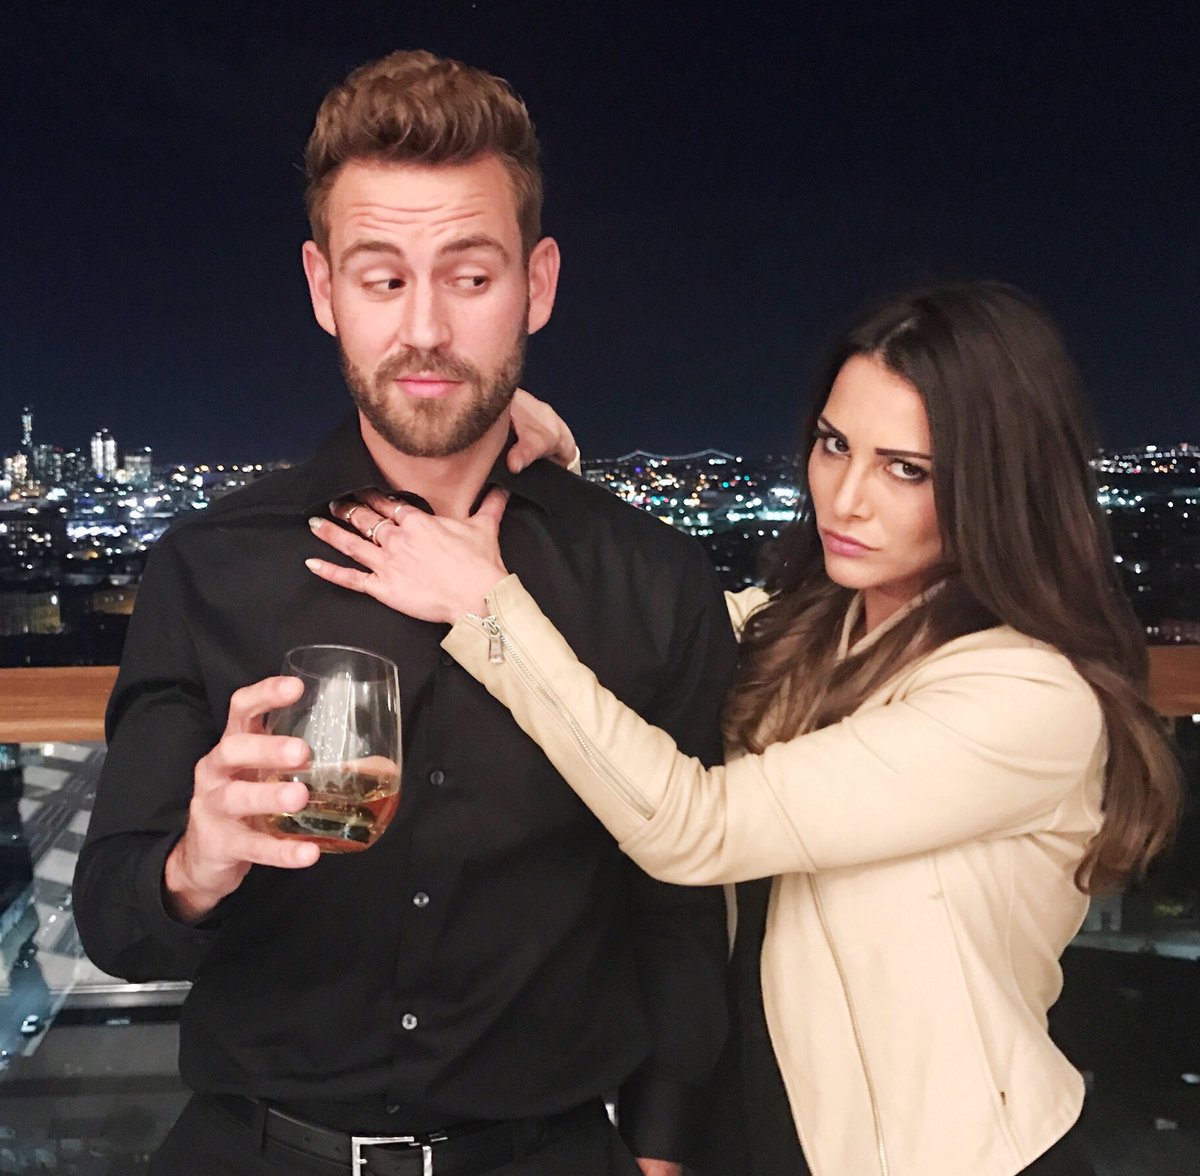 laplandfinland -  Nick Viall - Bachelor 21 - Episode 9 Feb 27 - *Sleuthing Spoilers* - Page 2 C5MkfomWcAA6Nrk